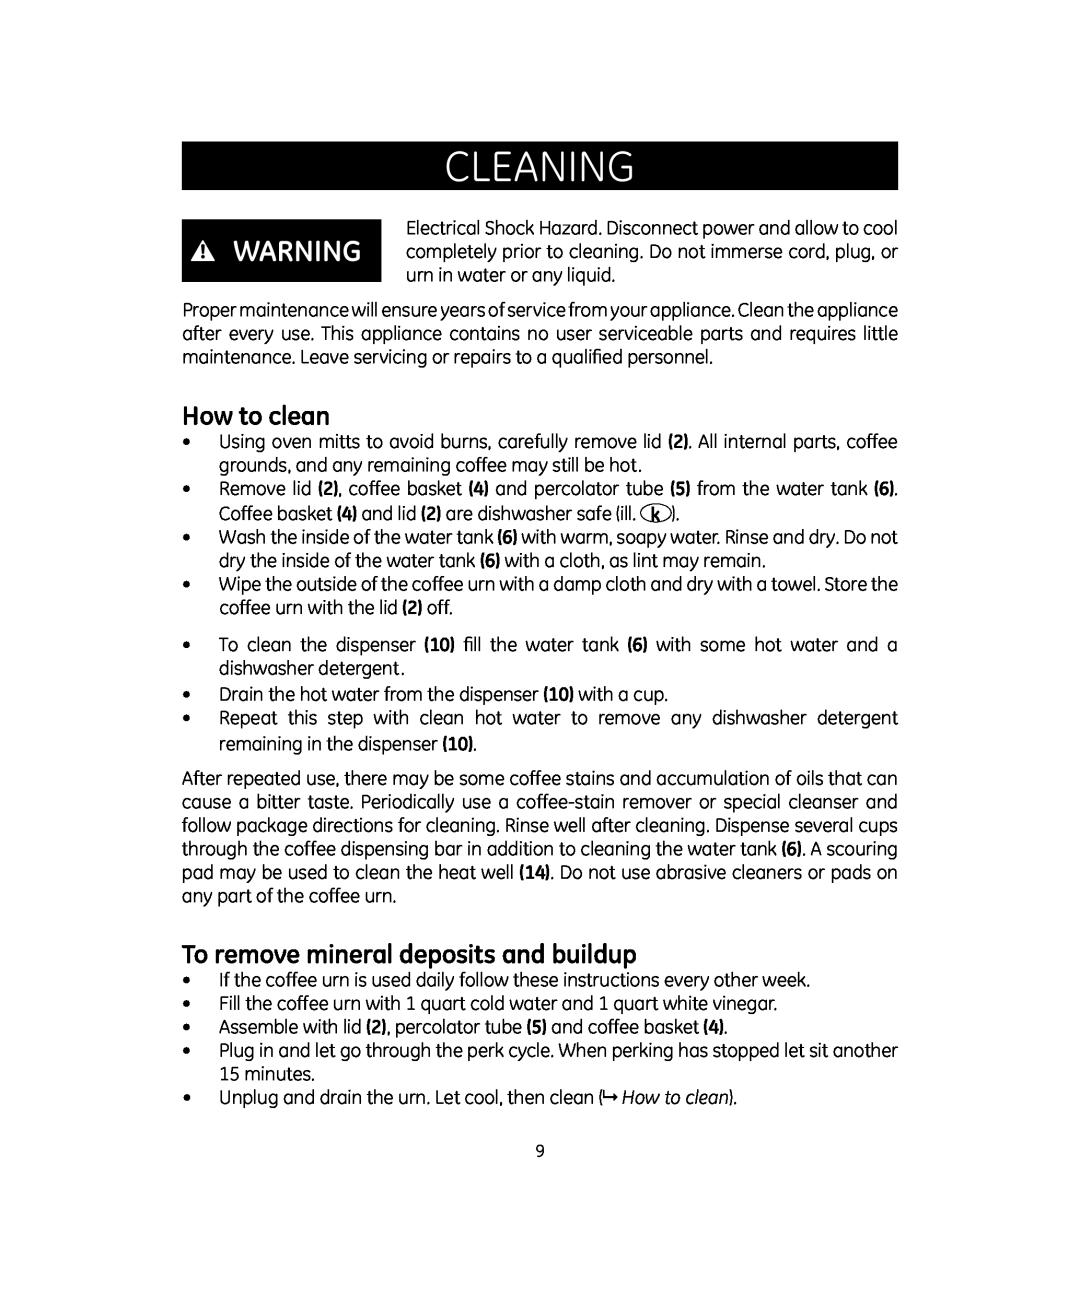 GE 681131691994 manual cleaning, How to clean, To remove mineral deposits and buildup 